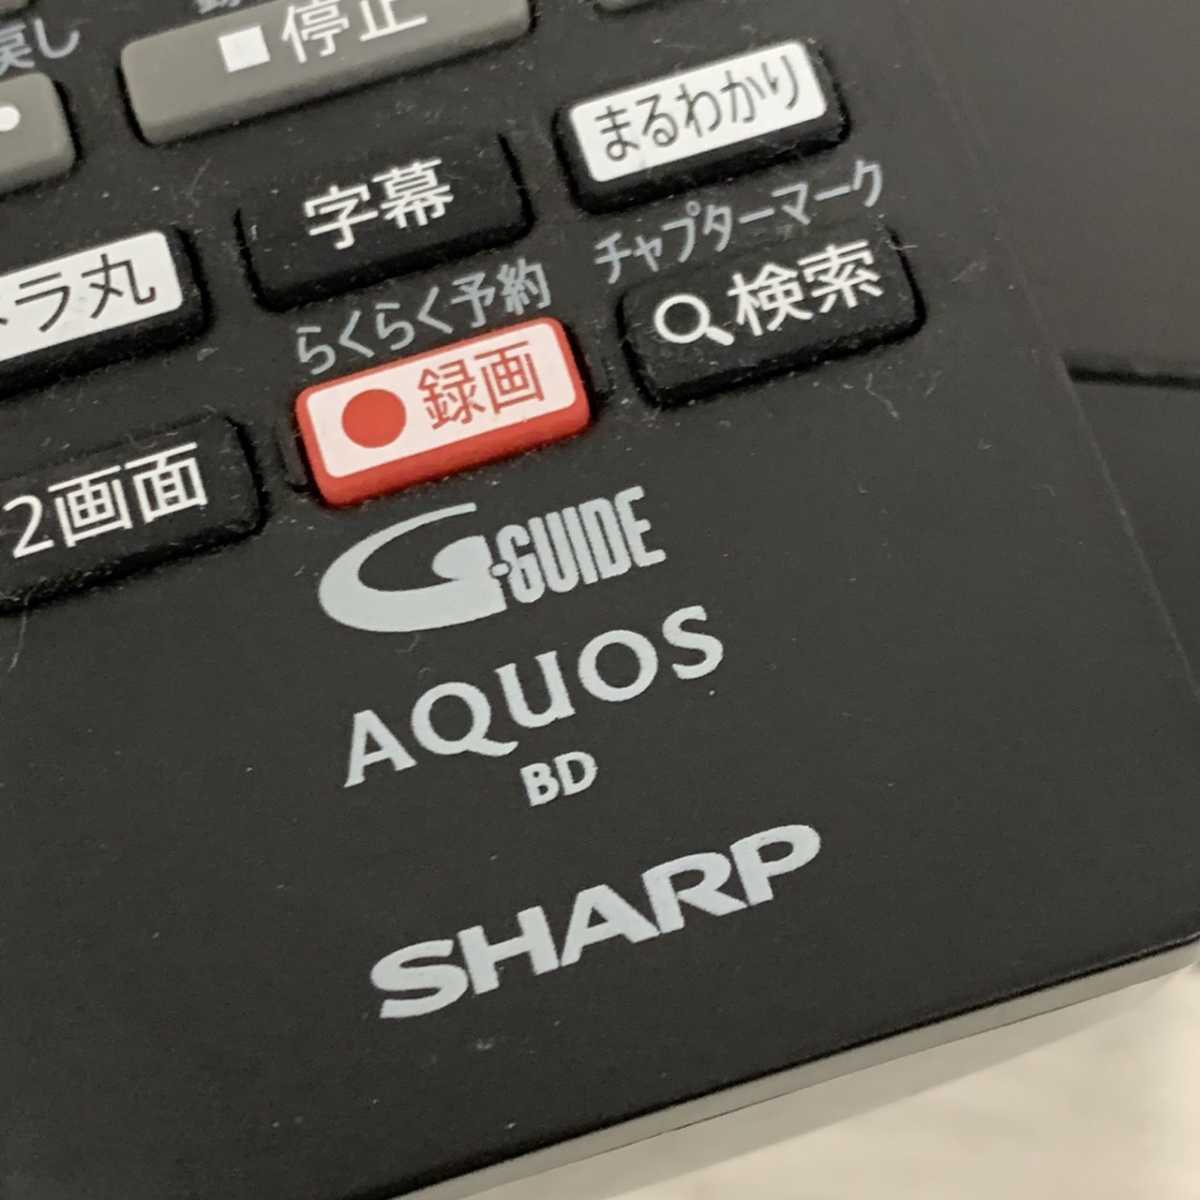  present condition goods SHARP AQUOS 2019 year made BD recorder 2B-C05BW1 HDD 2 number collection same time video recording sharp remote control through operation okka15